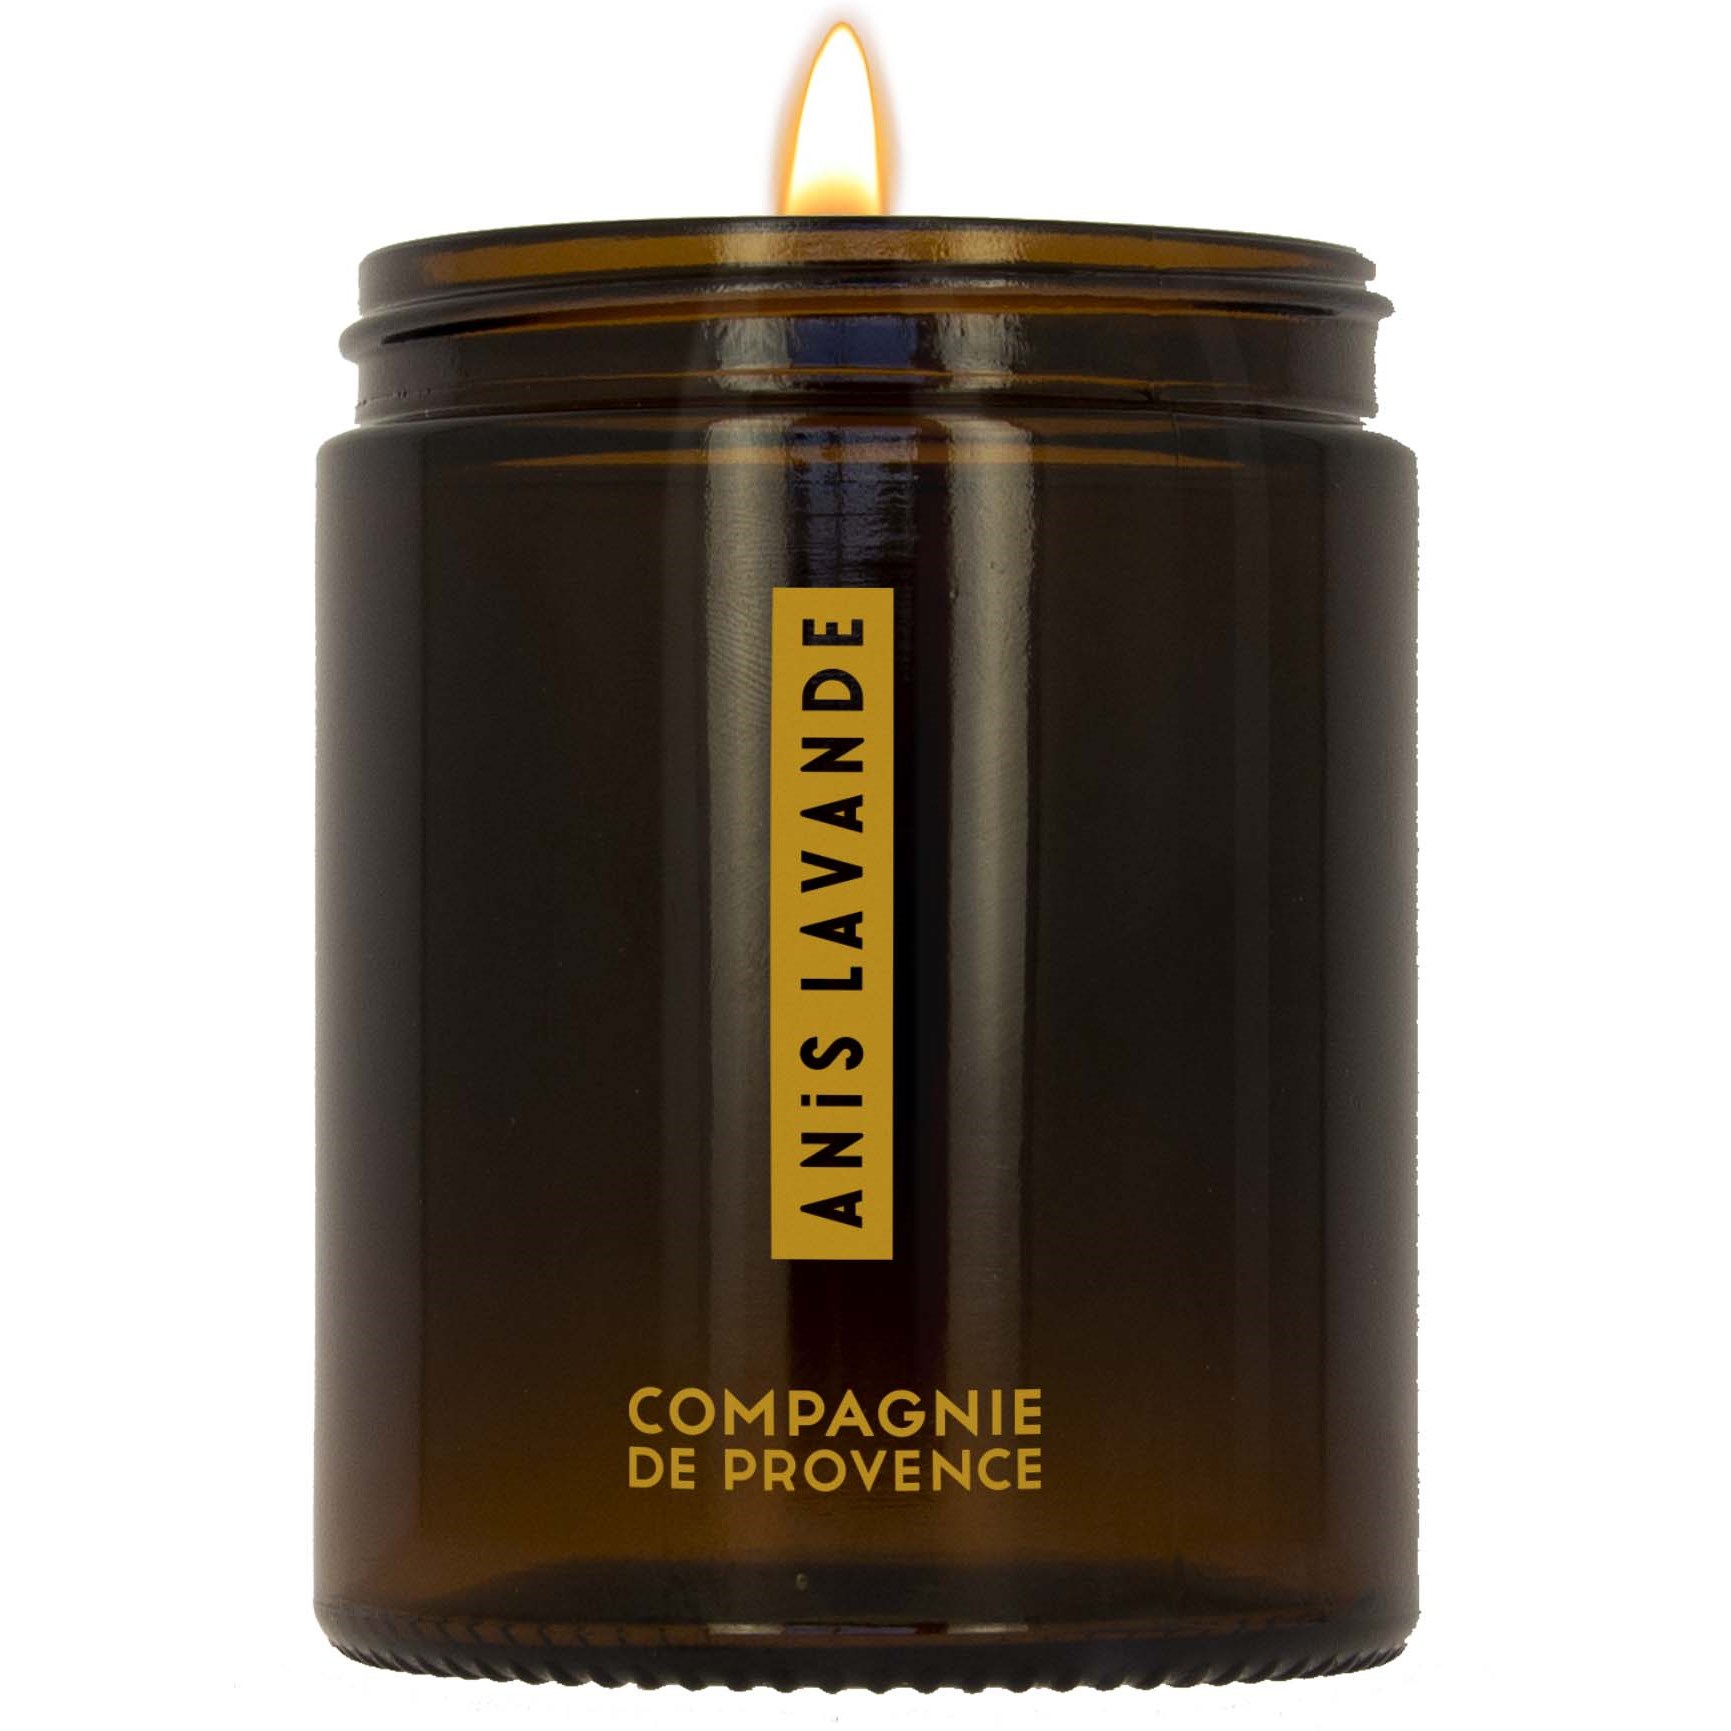 Läs mer om Compagnie de Provence Apothicare Scented Candle Anise Lavender